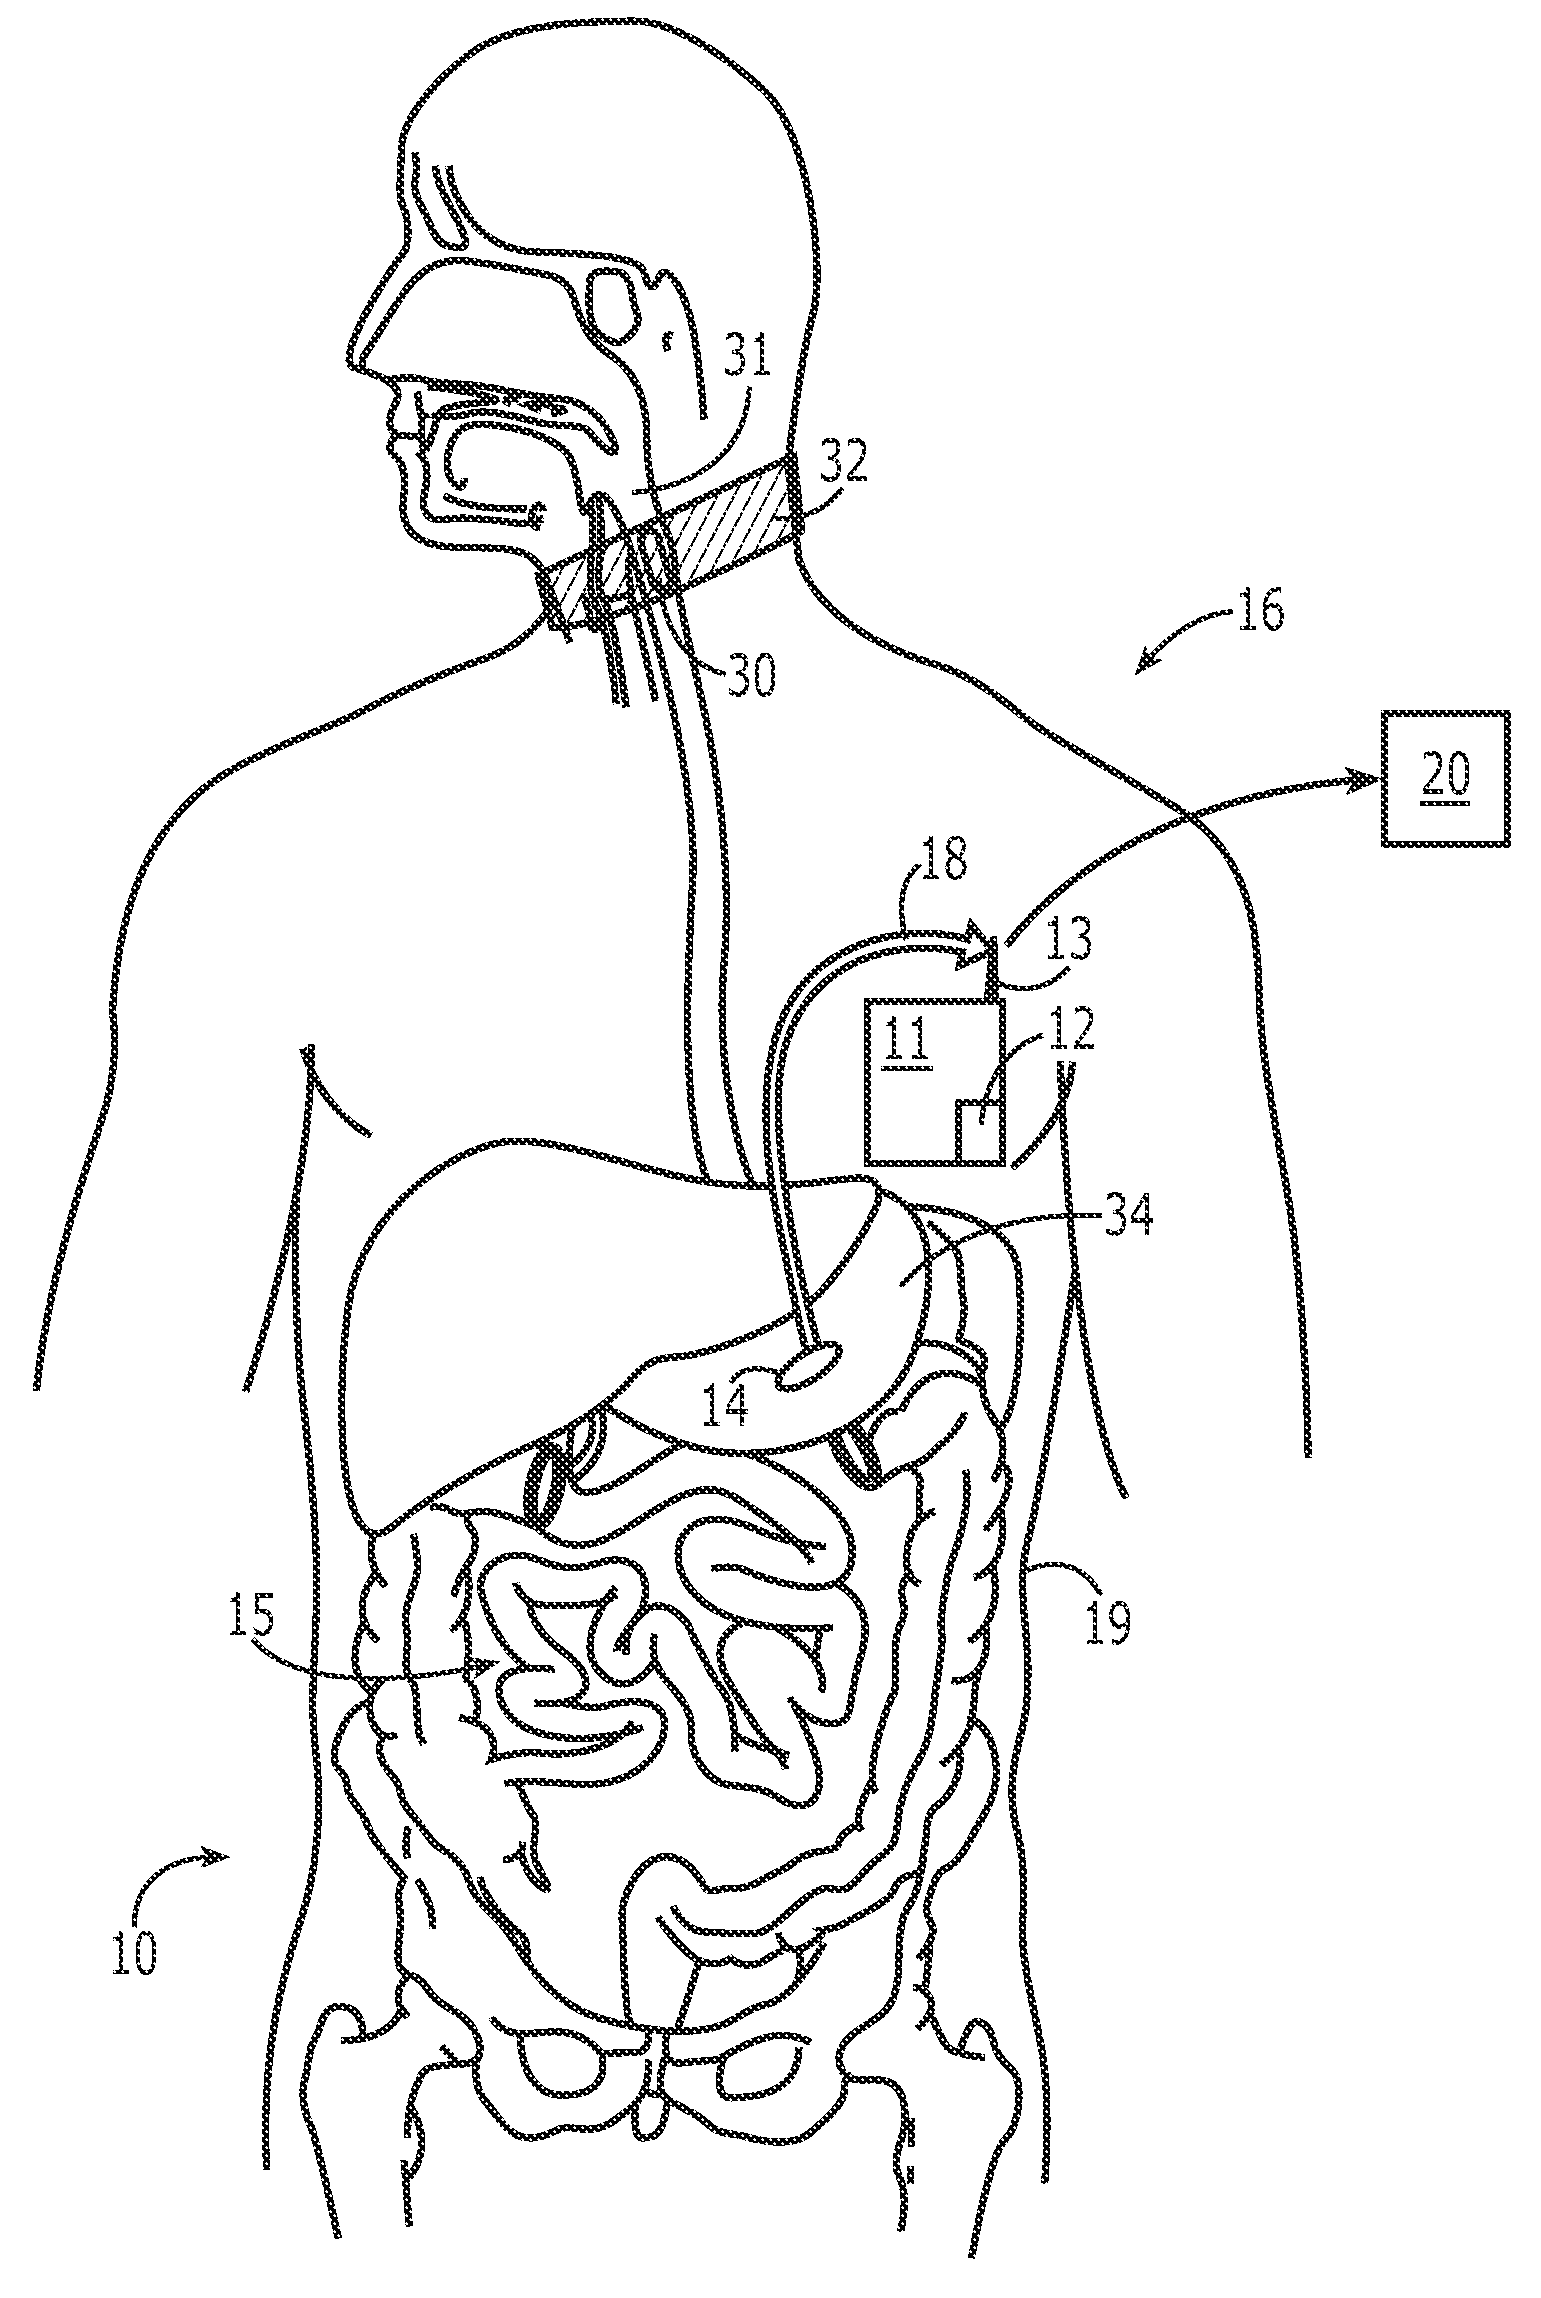 Medication compliance system and associated methods